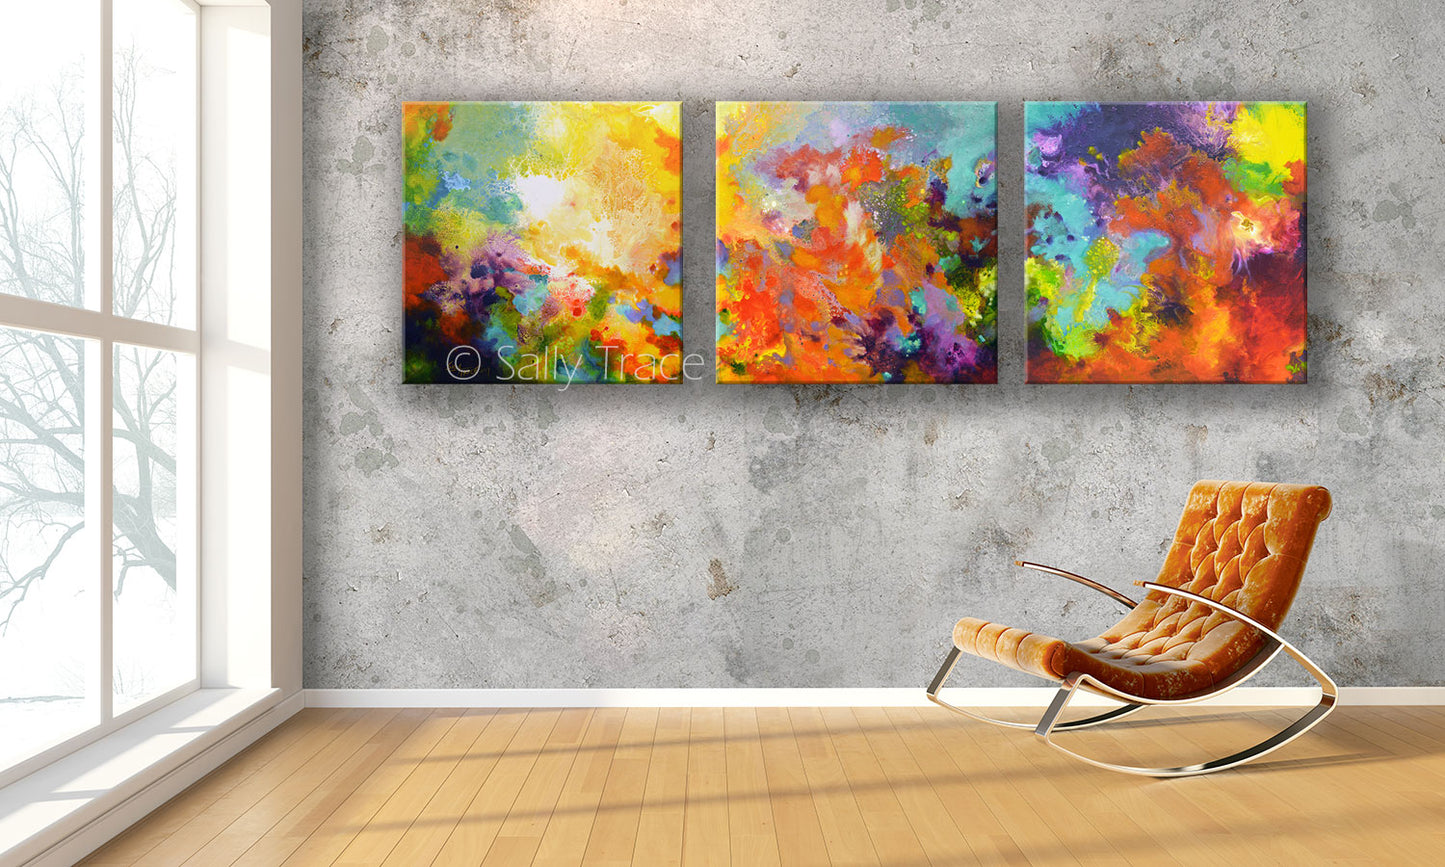 Large contemporary colorful modern modern art triptych prints on stretched canvas made from my original acrylic painting "Momentum". Coral, teal, yellow, violet and turquoise fine art prints for your bedroom, office, living room, dining room. Modern artwork horizontal prints for sale online by Sally Trace,  modern living room wall art painting.